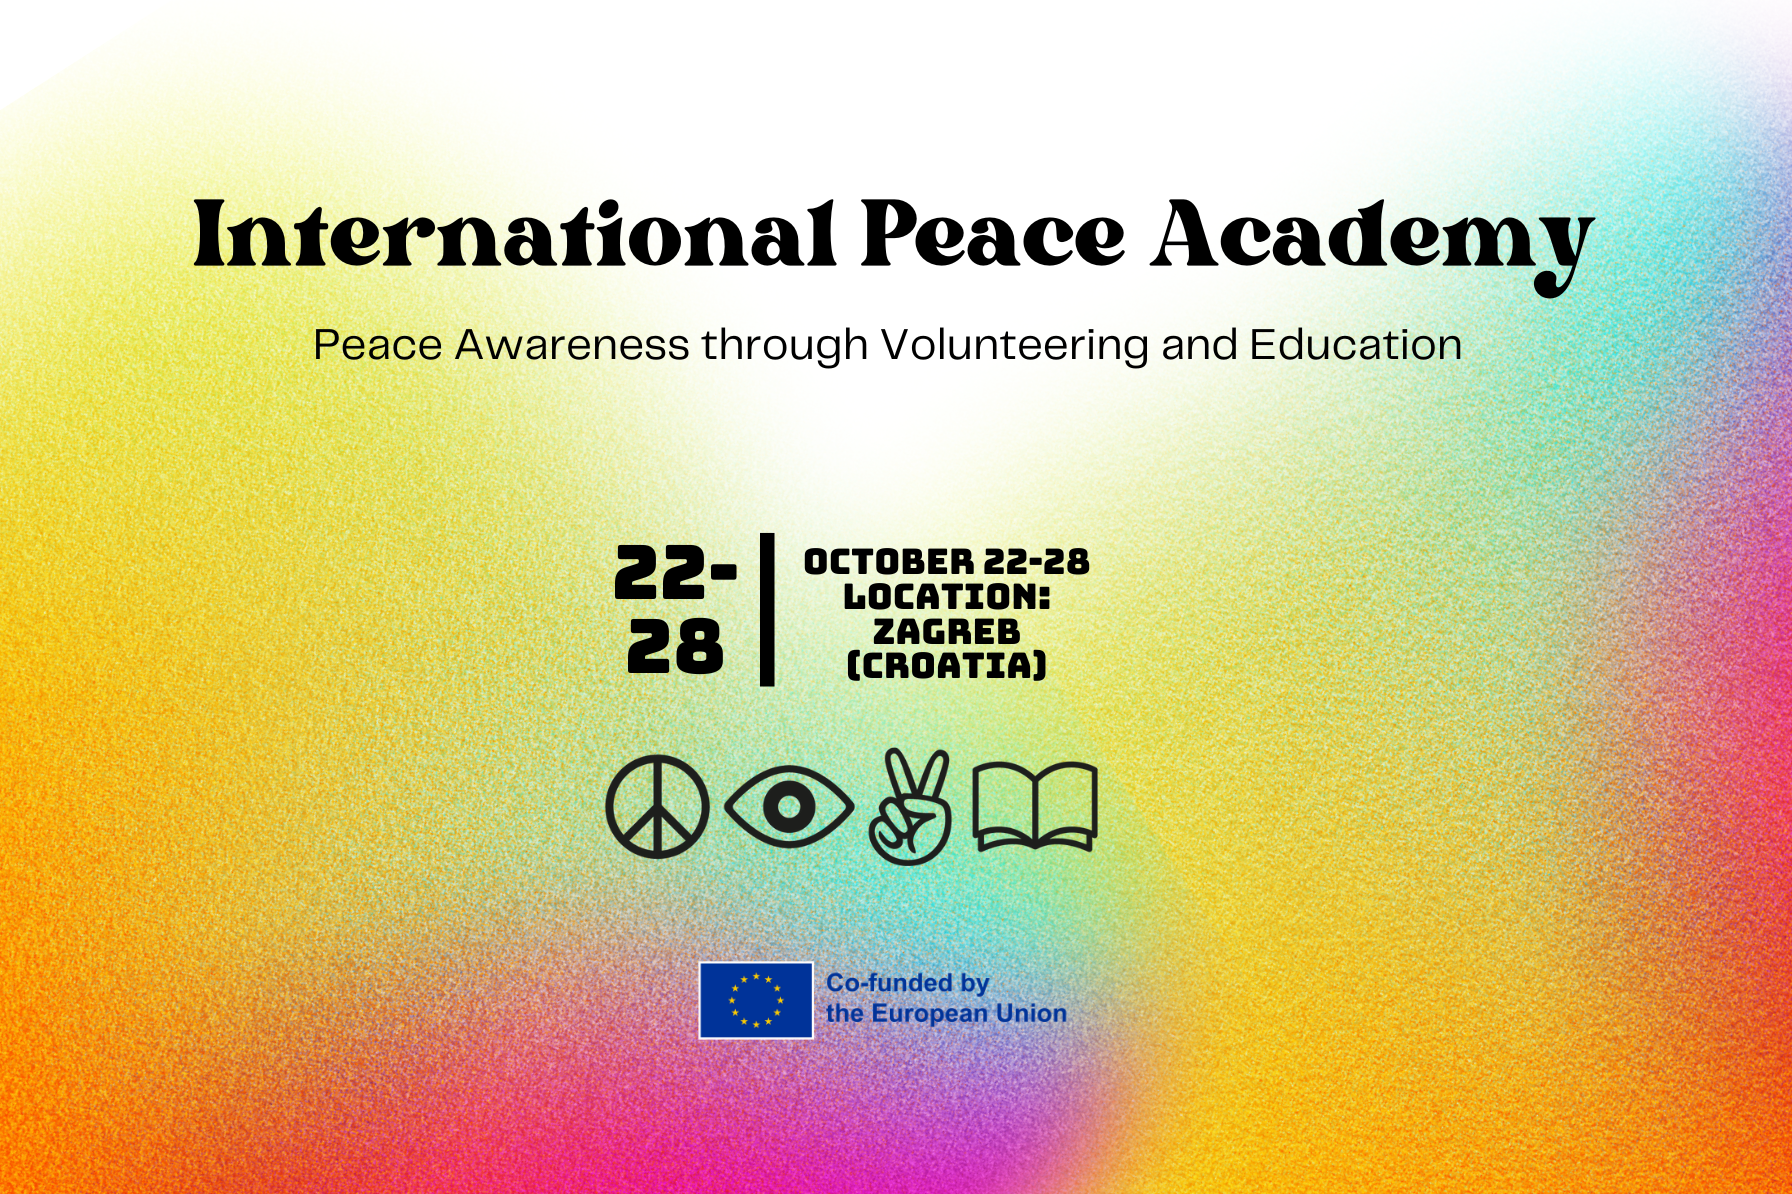 The International Peace Academy is hosted within the framework of the Erasmus+ project “PAVE“. This opportunity is extended to 60 young Europeans, aged 18 to 30